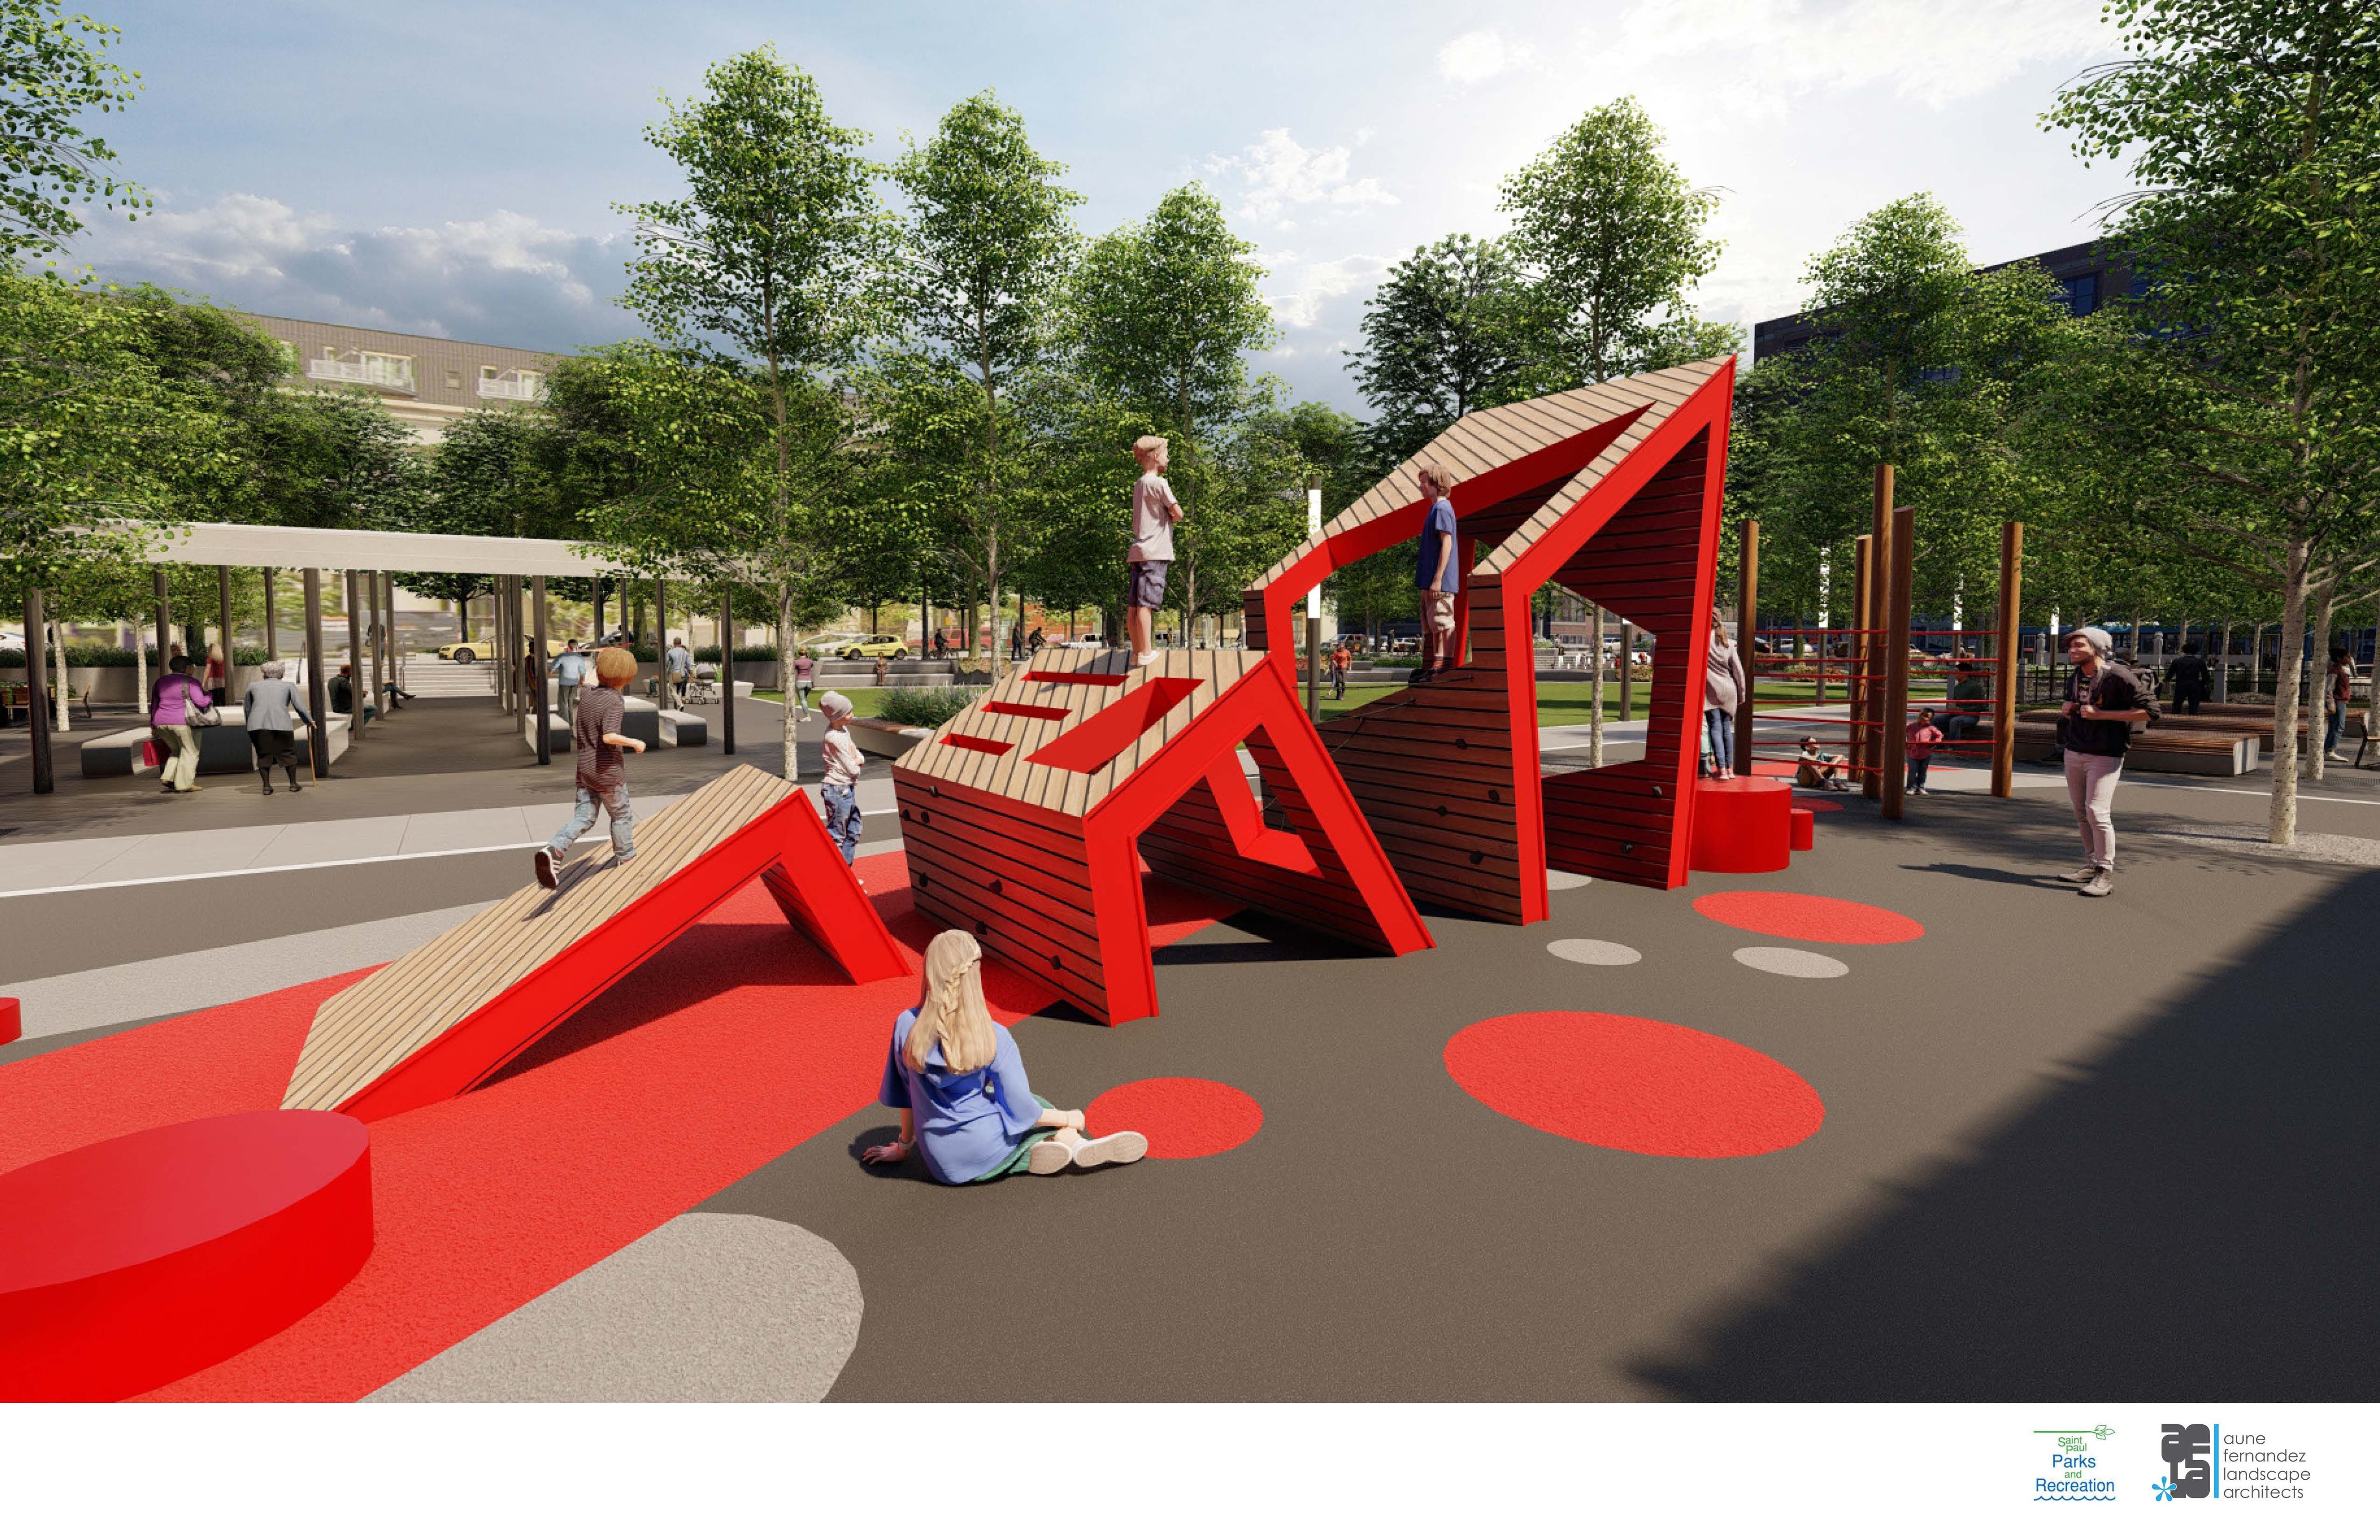 A rendering of a tall bright red play structure for children with people